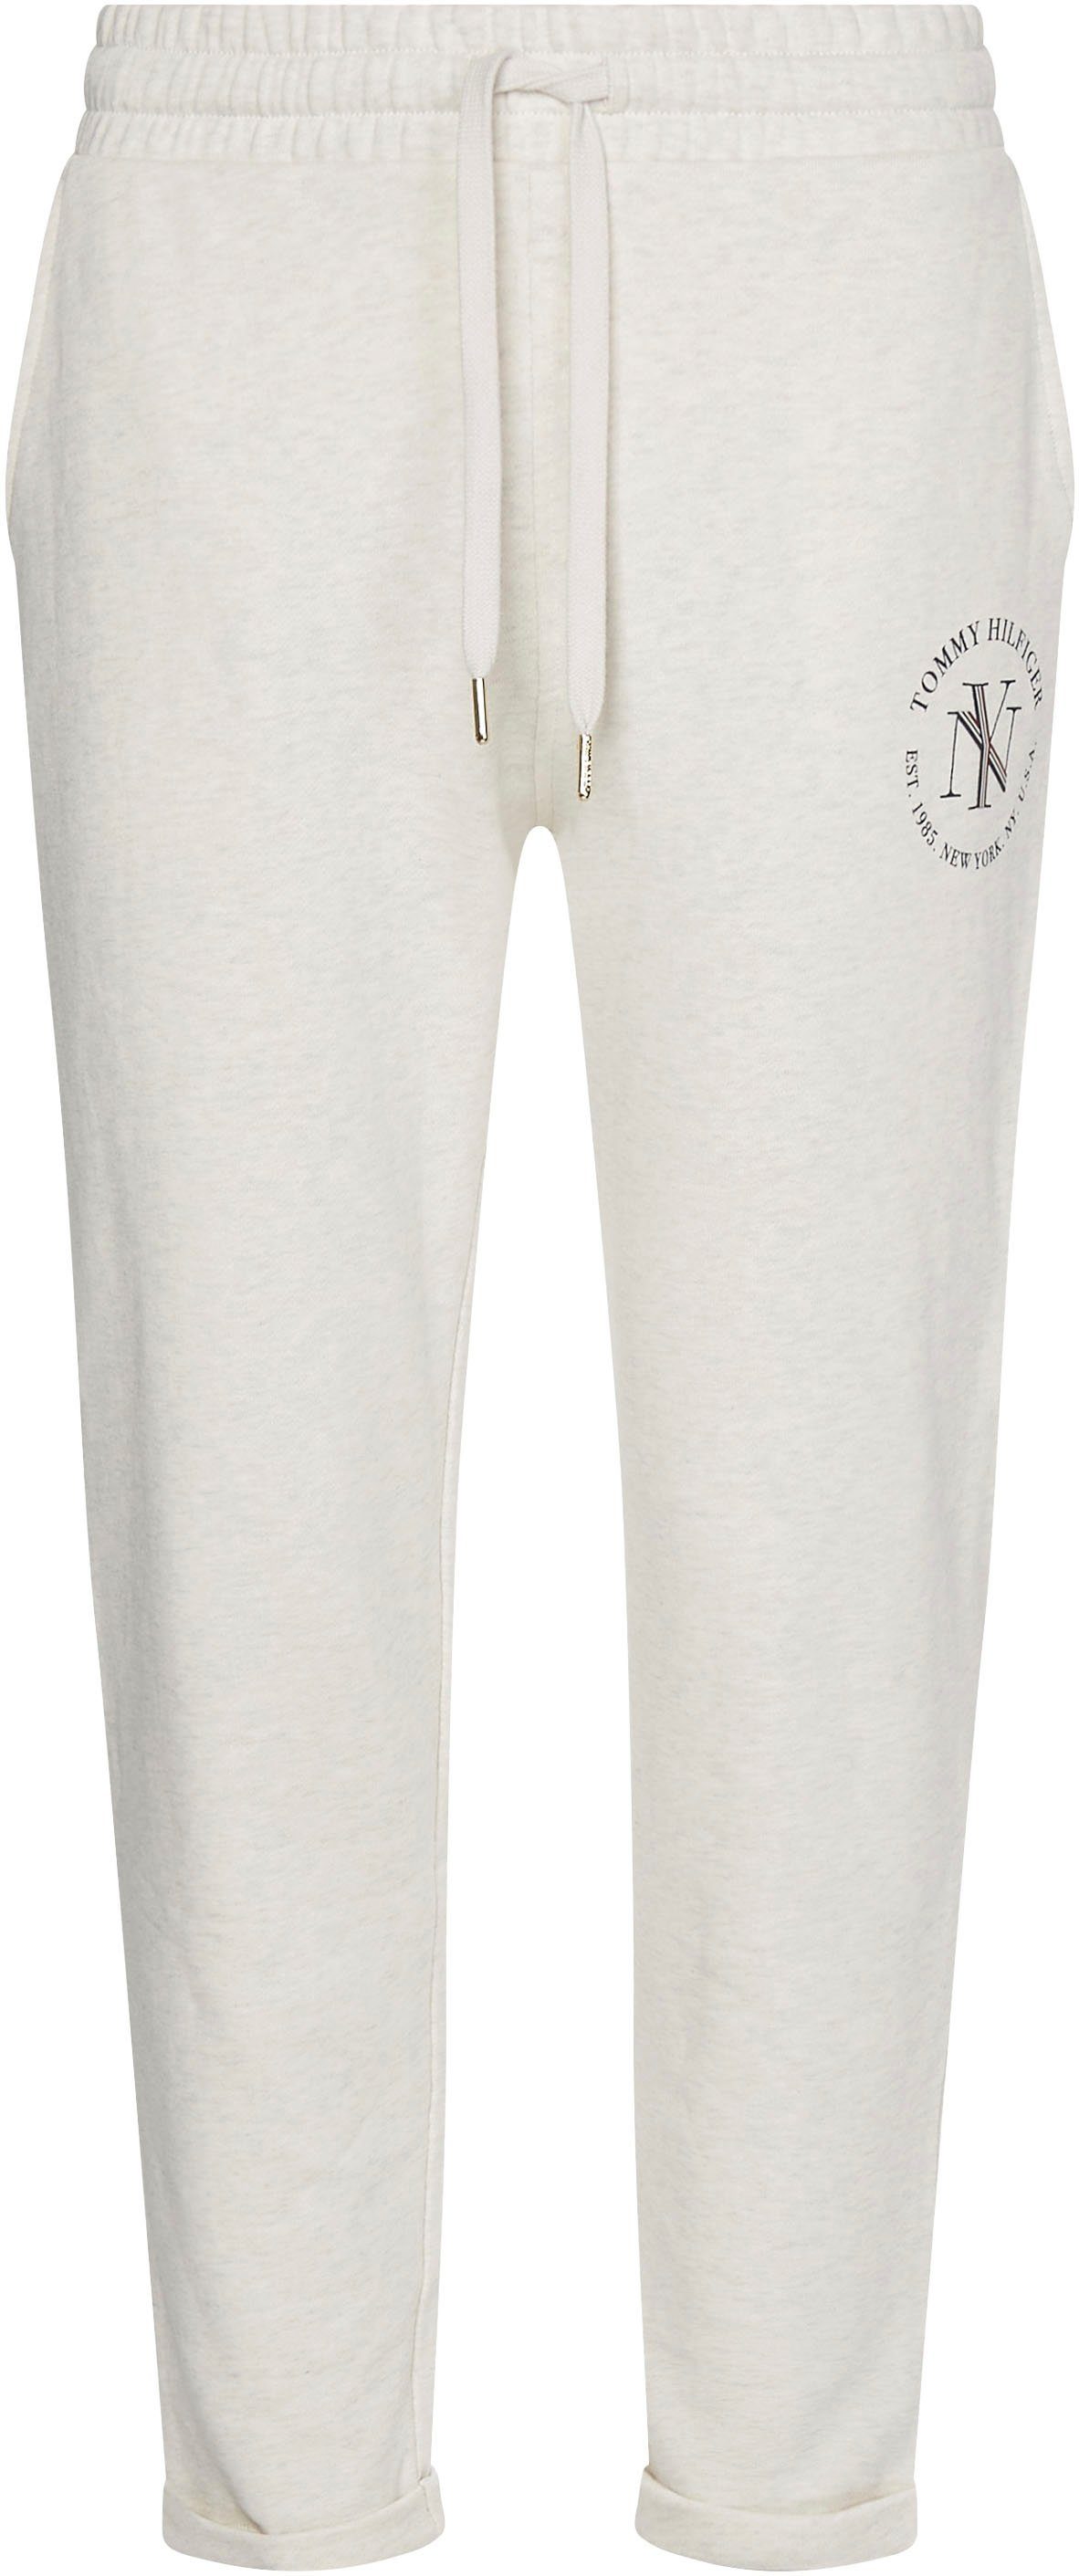 Tommy Sweatpants TAPERED Hilfiger NYC Markenlabel SWEATPANTS mit Tommy ROUNDALL White-Heather Hilfiger